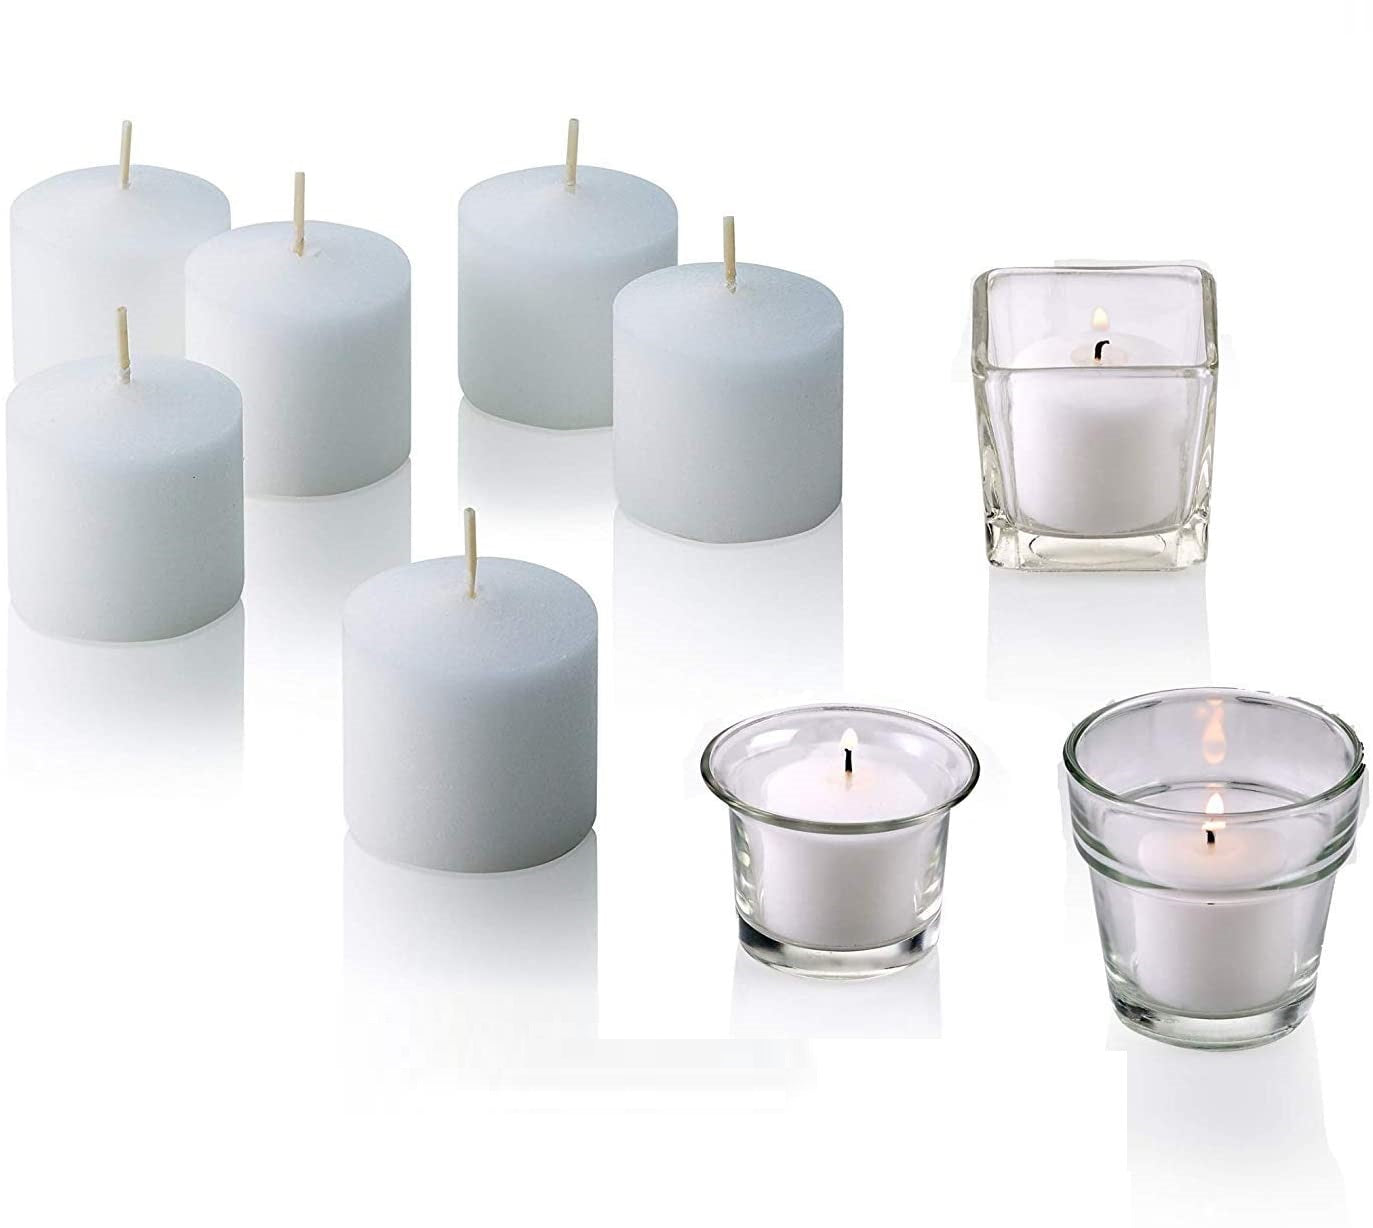 Wax Votive Candles 8 Hours Burning Unscented Ideal for Birthday Aromatherapy Party Candle Gardens & Home Décor (Set of 12, White)